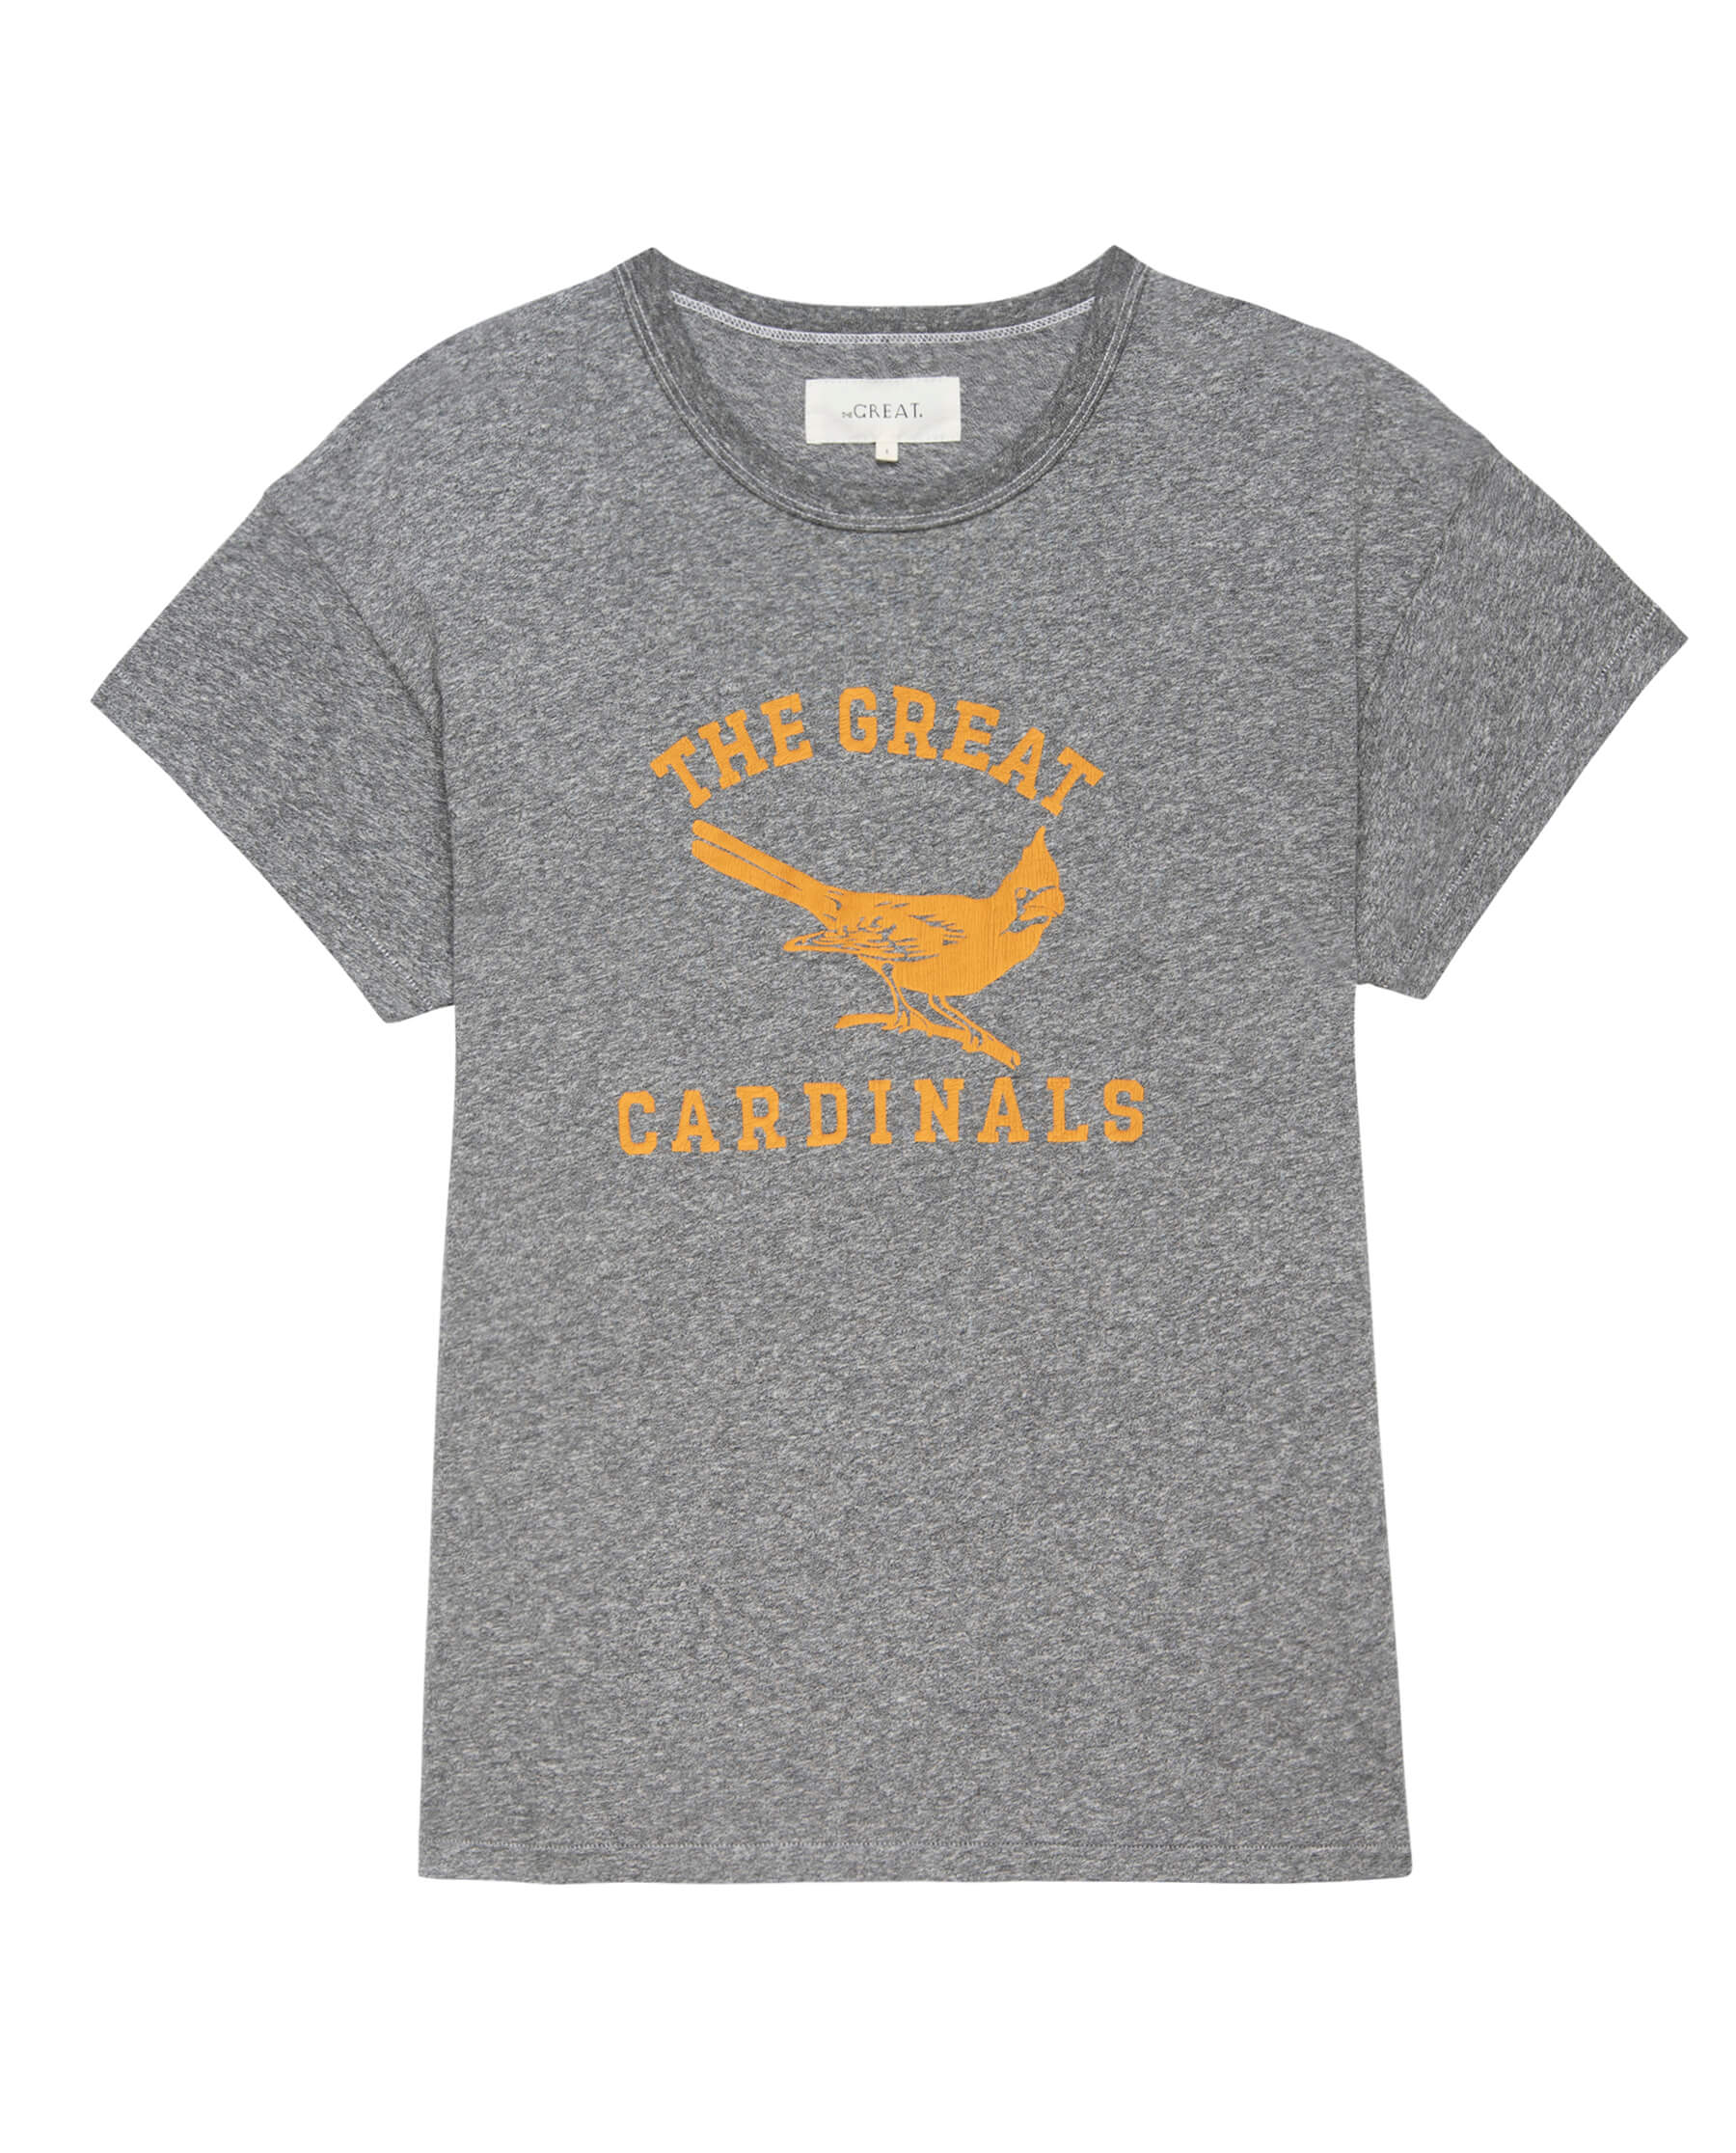 The Boxy Crew. Graphic -- Heather Grey with Perched Cardinal Graphic TEES THE GREAT. SP24 D2